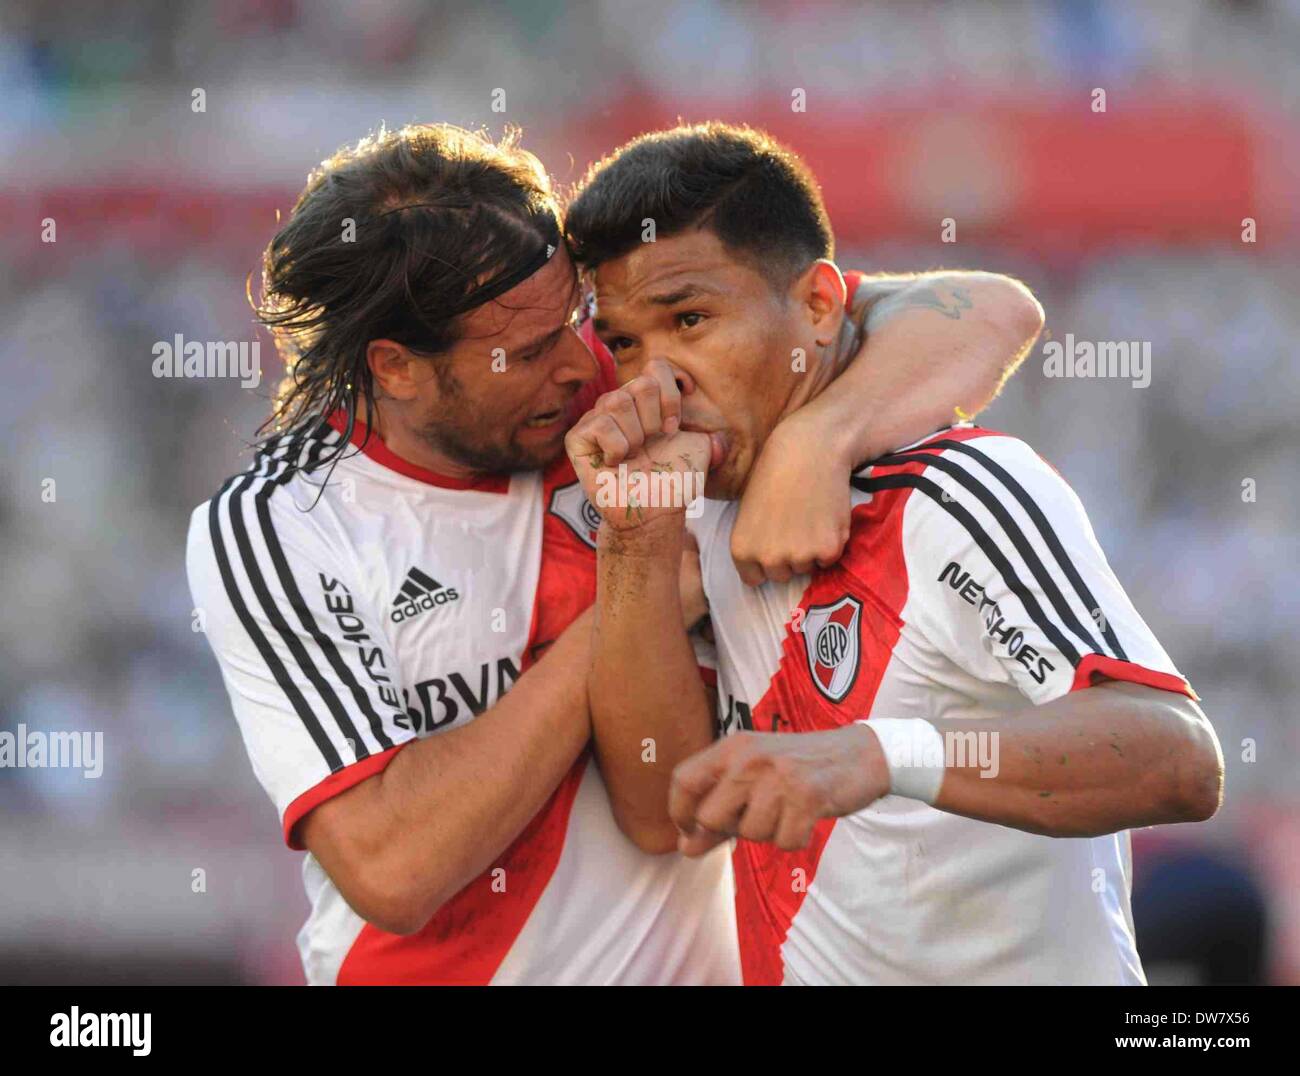 Buenos Aires, Argentina. 2nd Mar, 2014. Teofilo Gutierrez (R) of River Plate celebrates with his teammate Fernando Cavenaghi (L) during their match of the Final Tournament against San Lorenzo, held at Monumental Stadium, in Buenos Aires, Argentina, on March 2, 2014. Credit:  Maximiliano Luna/TELAM/Xinhua/Alamy Live News Stock Photo